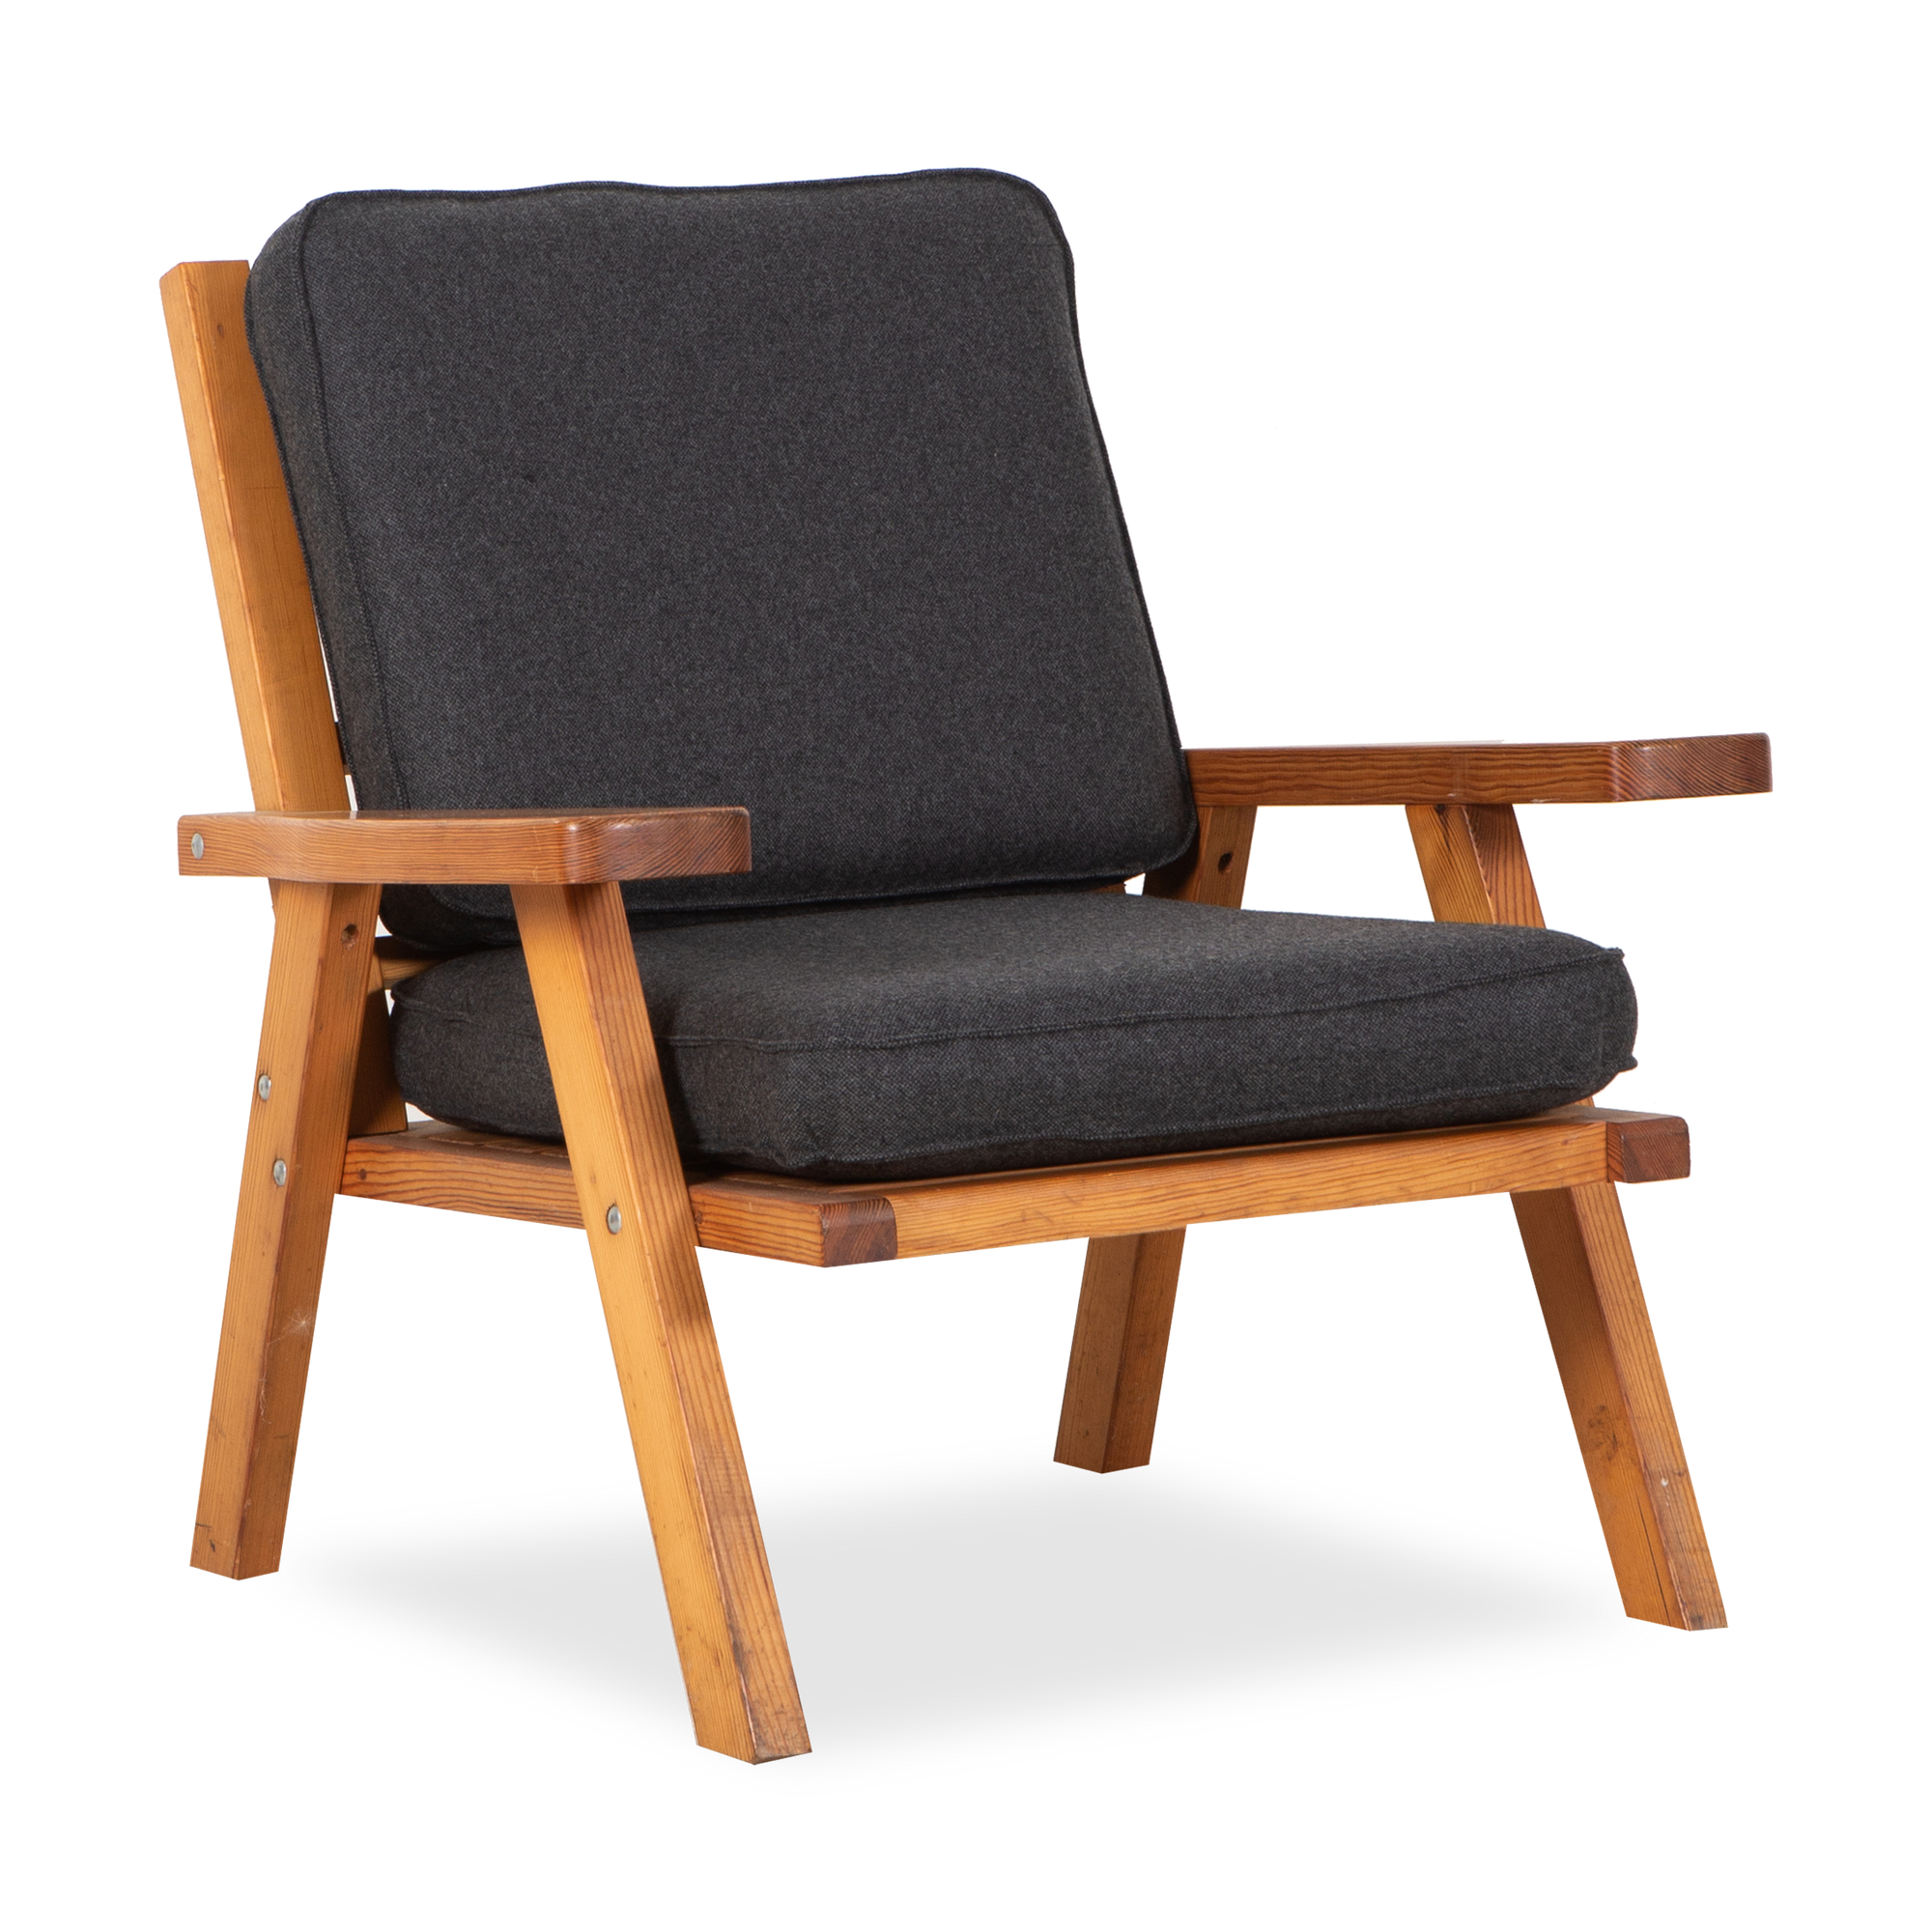 A mid-century staple, this vintage Danish Easy chair was designed by Rainer Daumiller and manufactured by Hirtshals Furniture, circa 1960s.